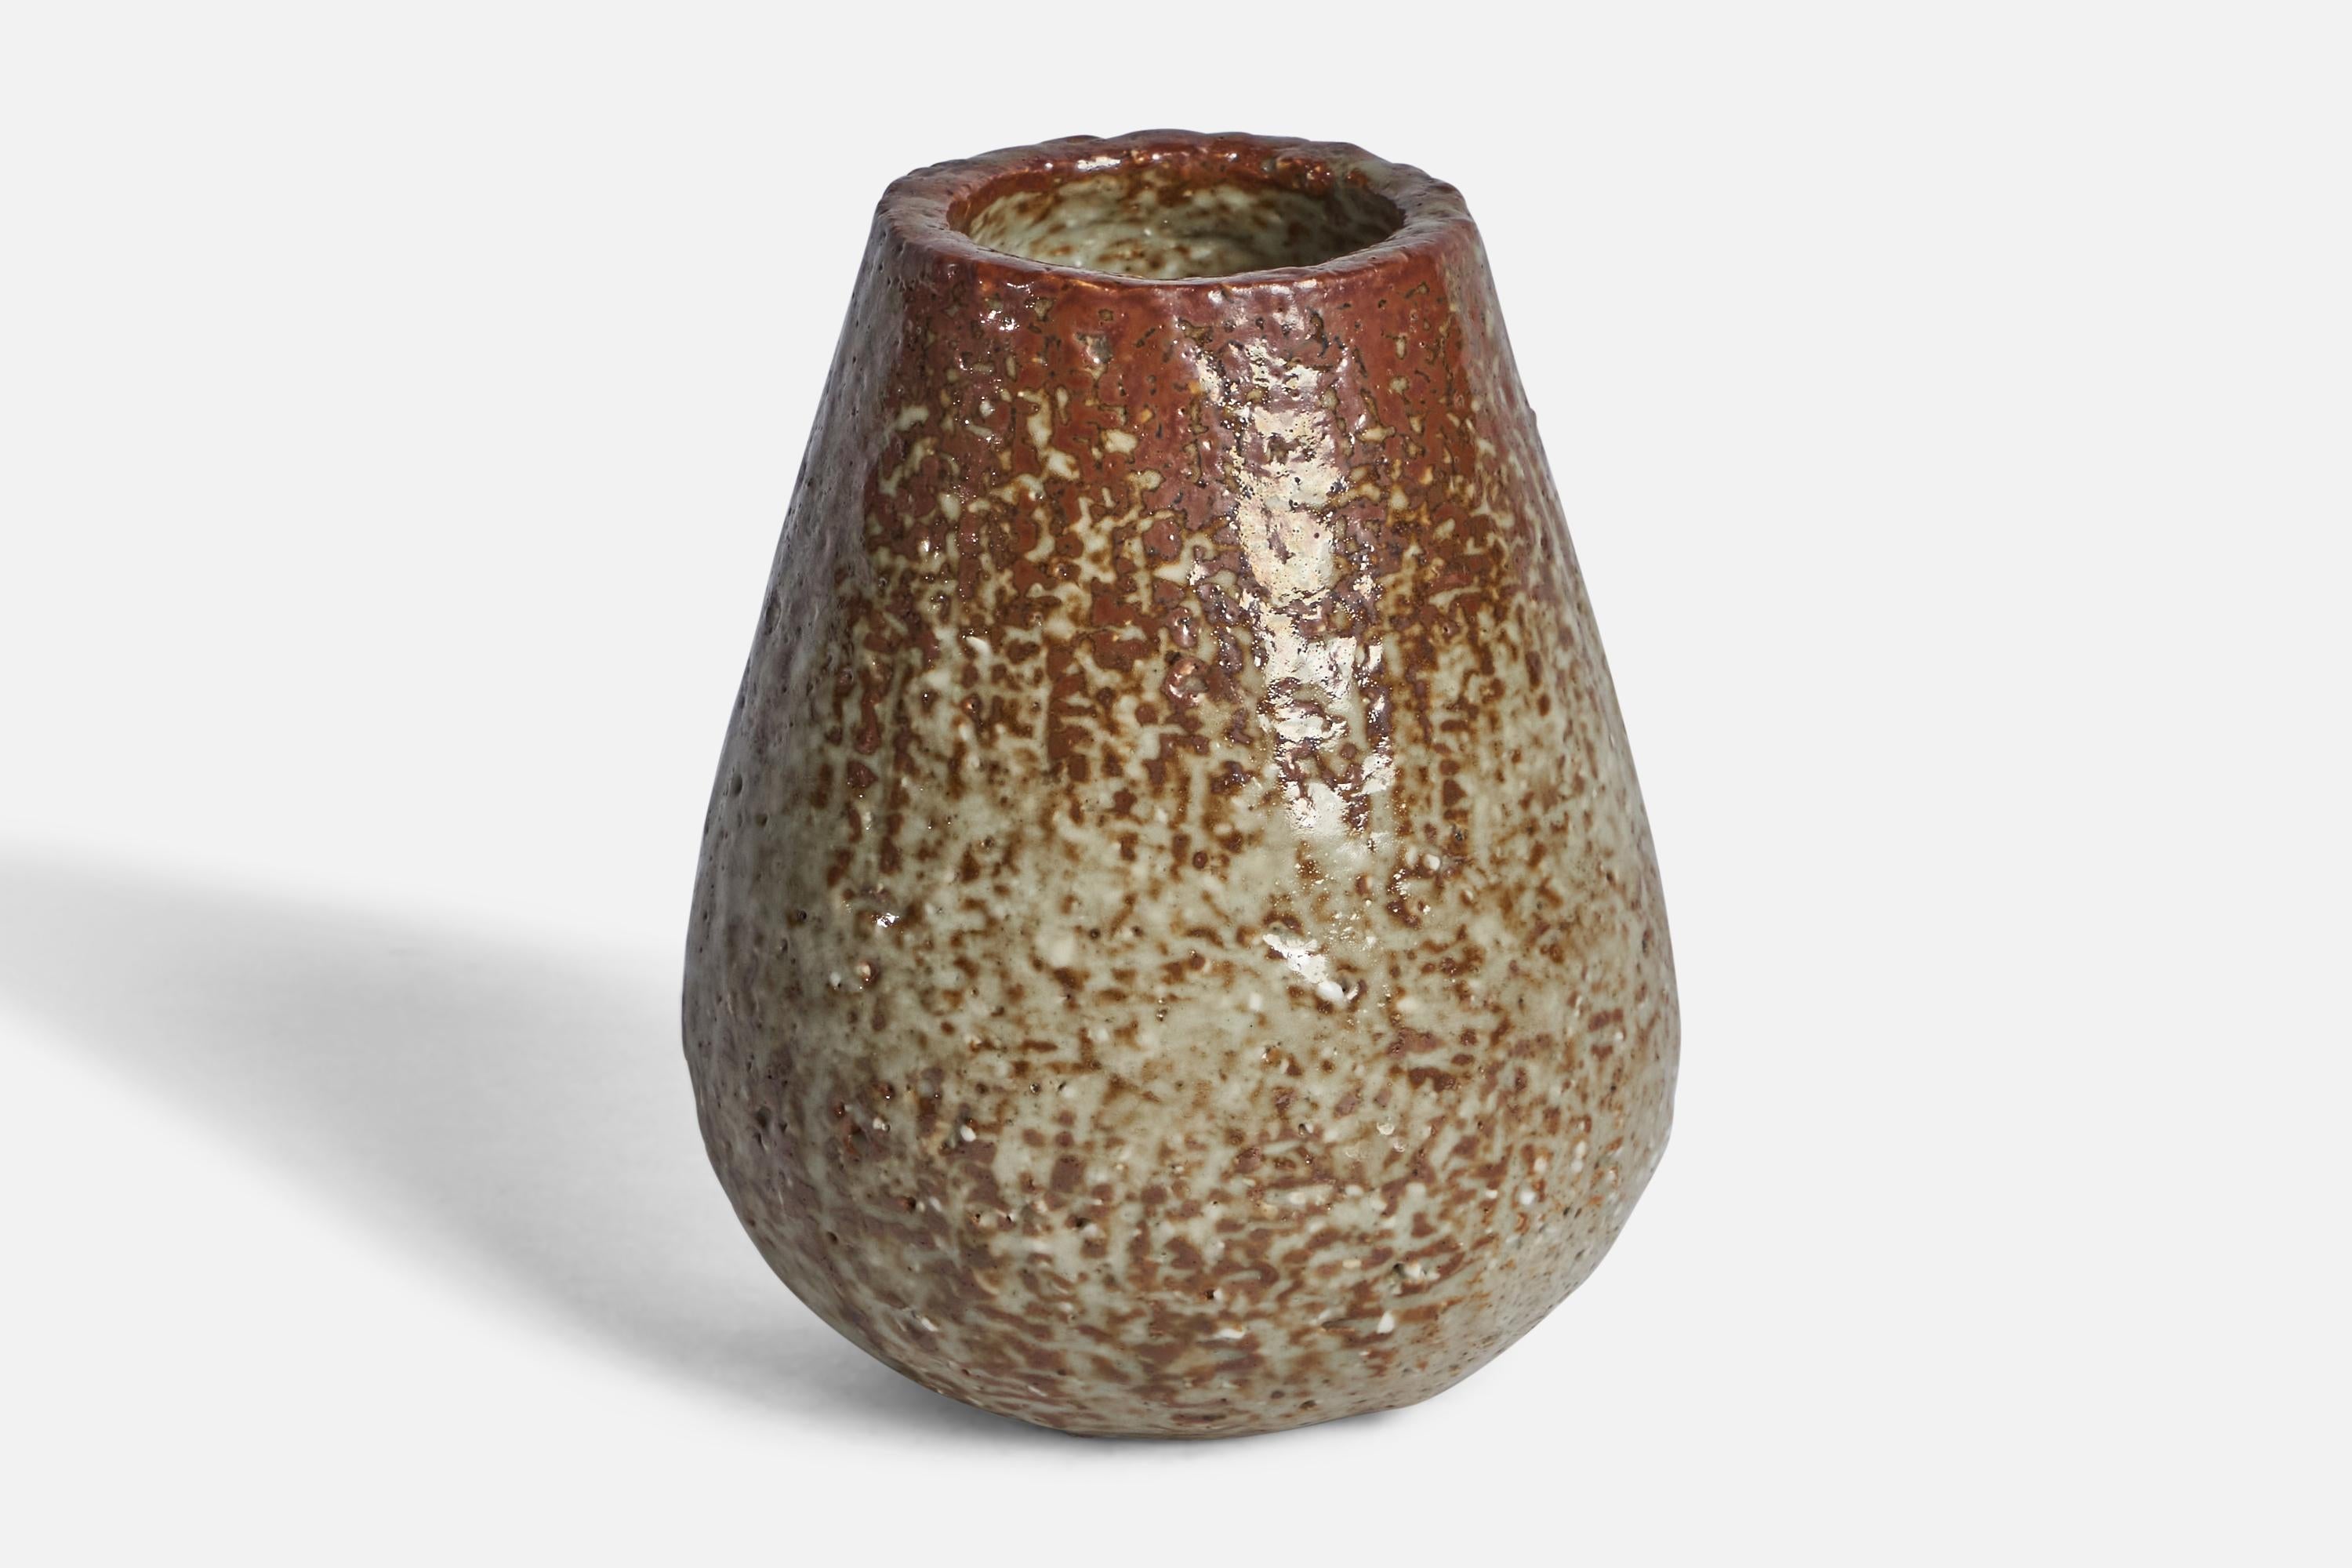 A red and grey-glazed stoneware vase designed by Gunnar Nylund and produced by Rörstrand, Sweden, 1950s.